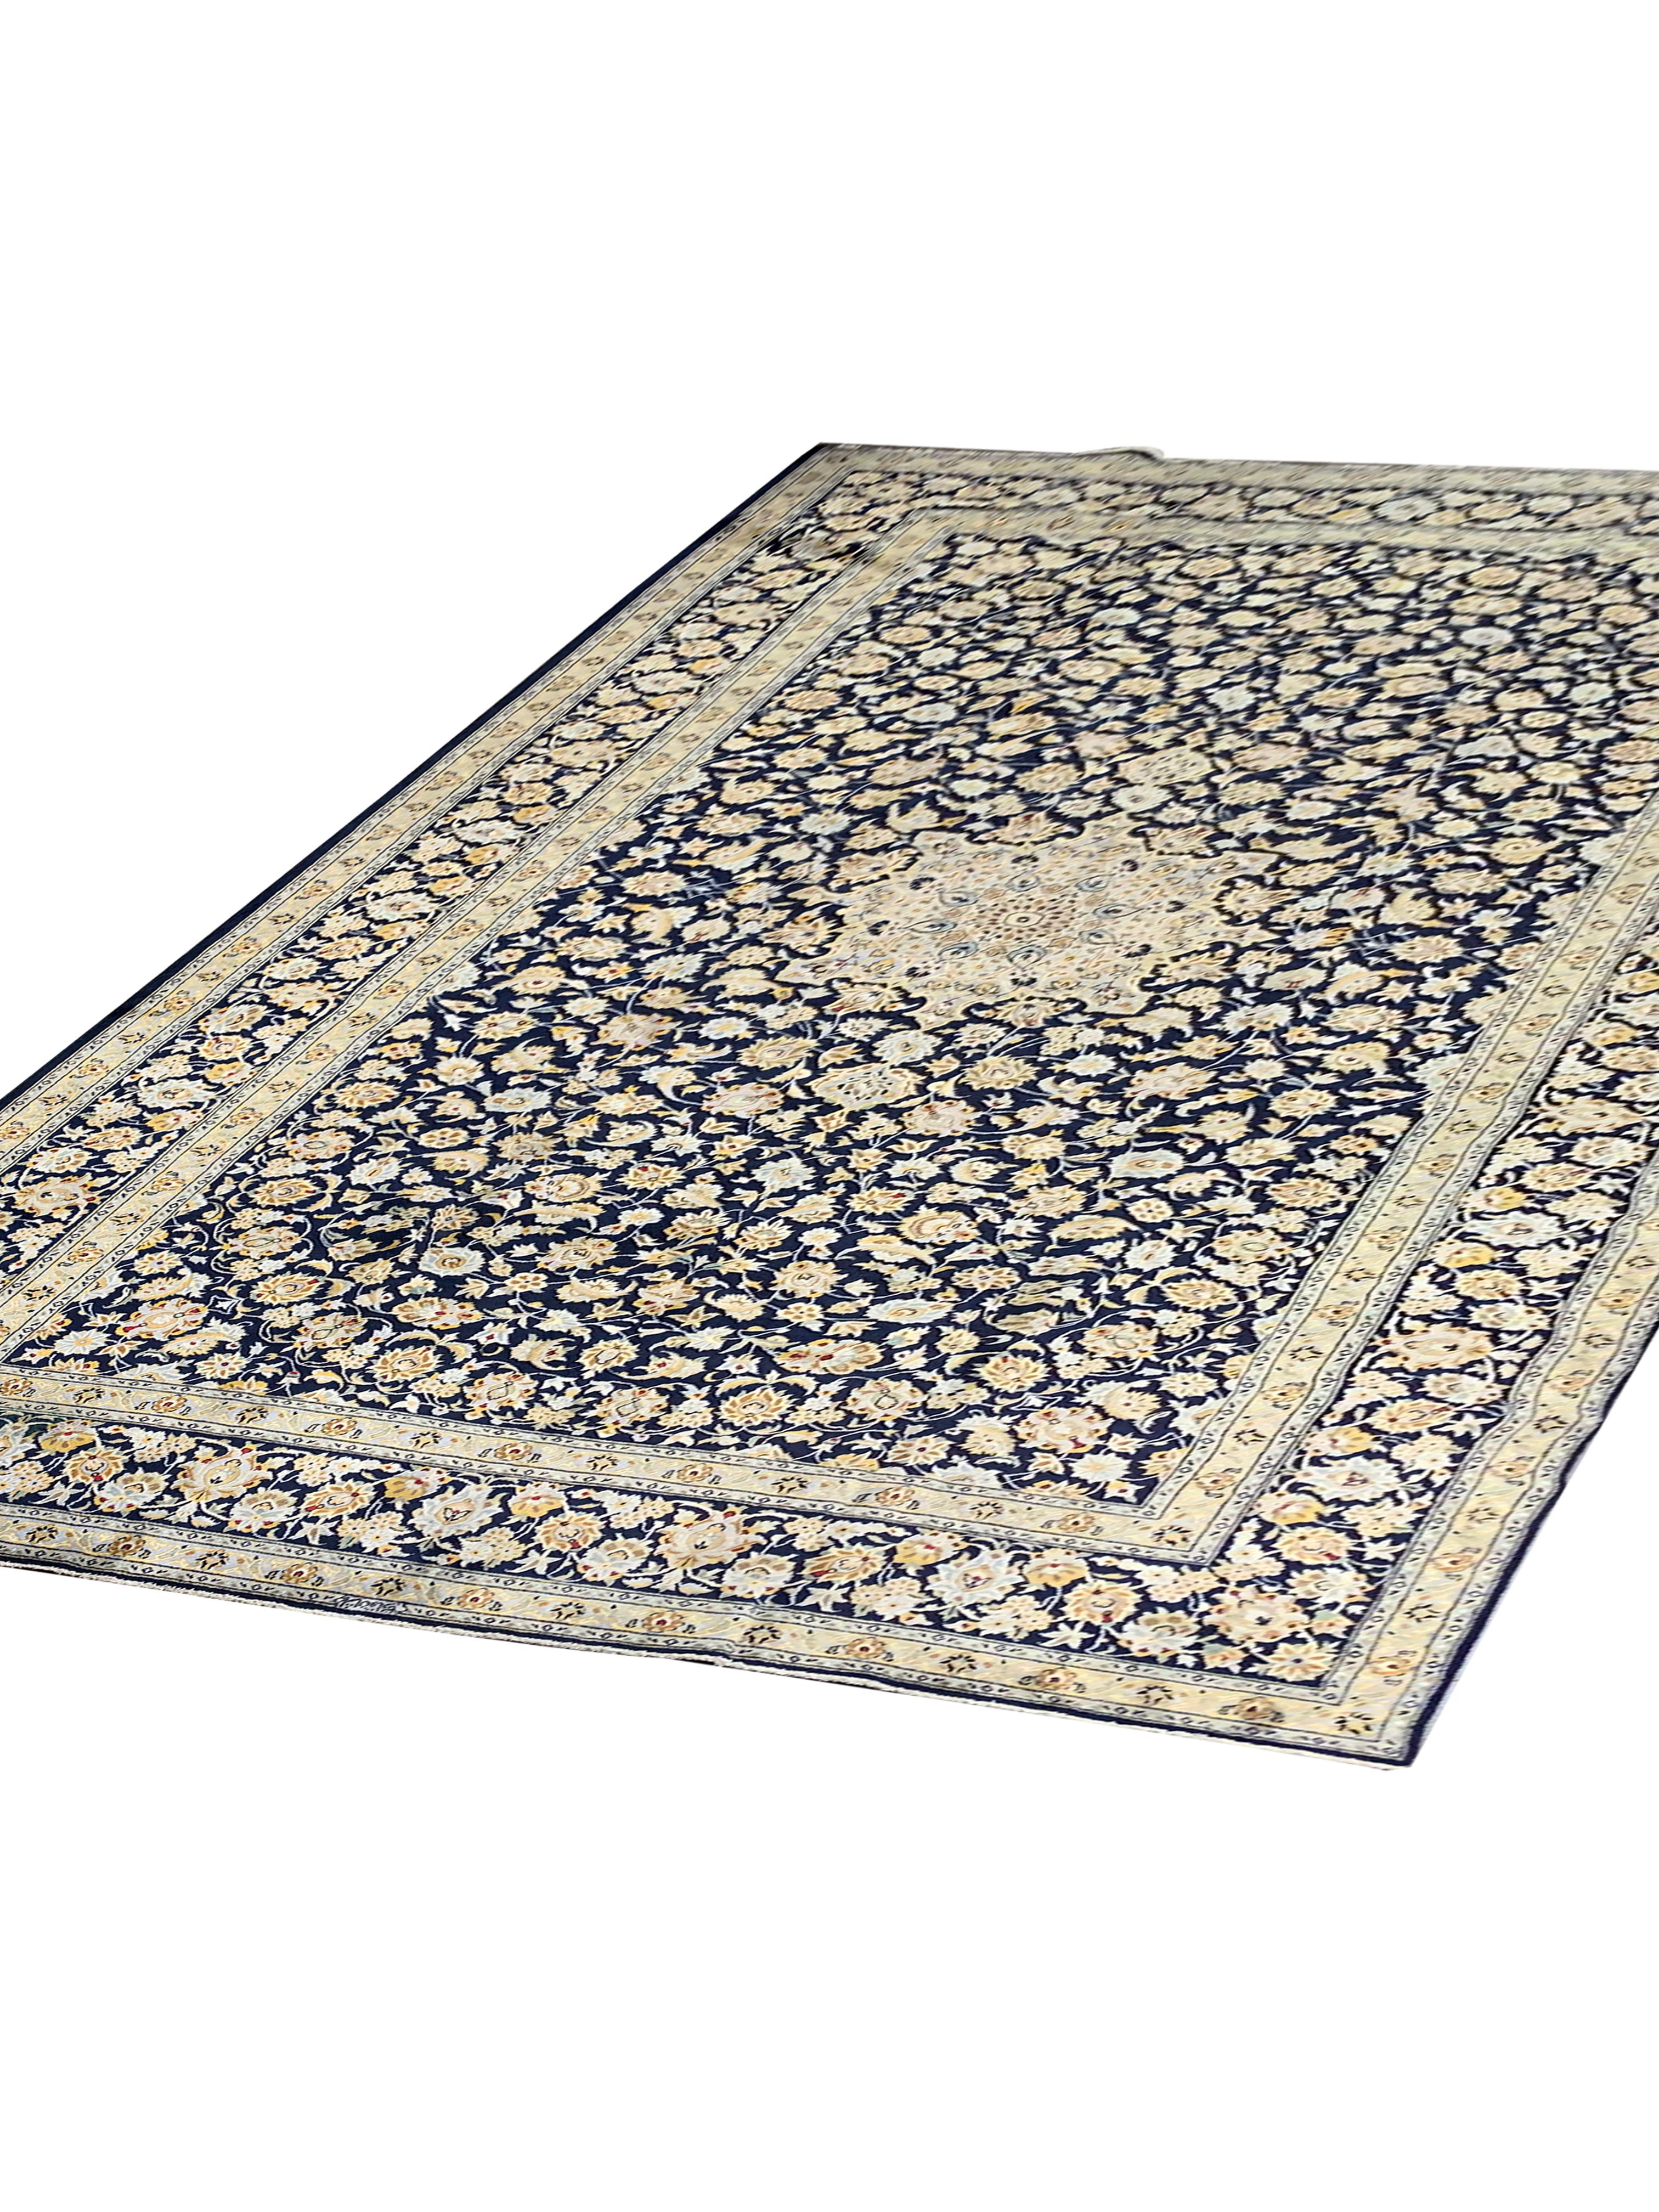 Hand-Knotted Traditional Handmade Vintage Carpet Large Blue Cream Wool Area Rug For Sale